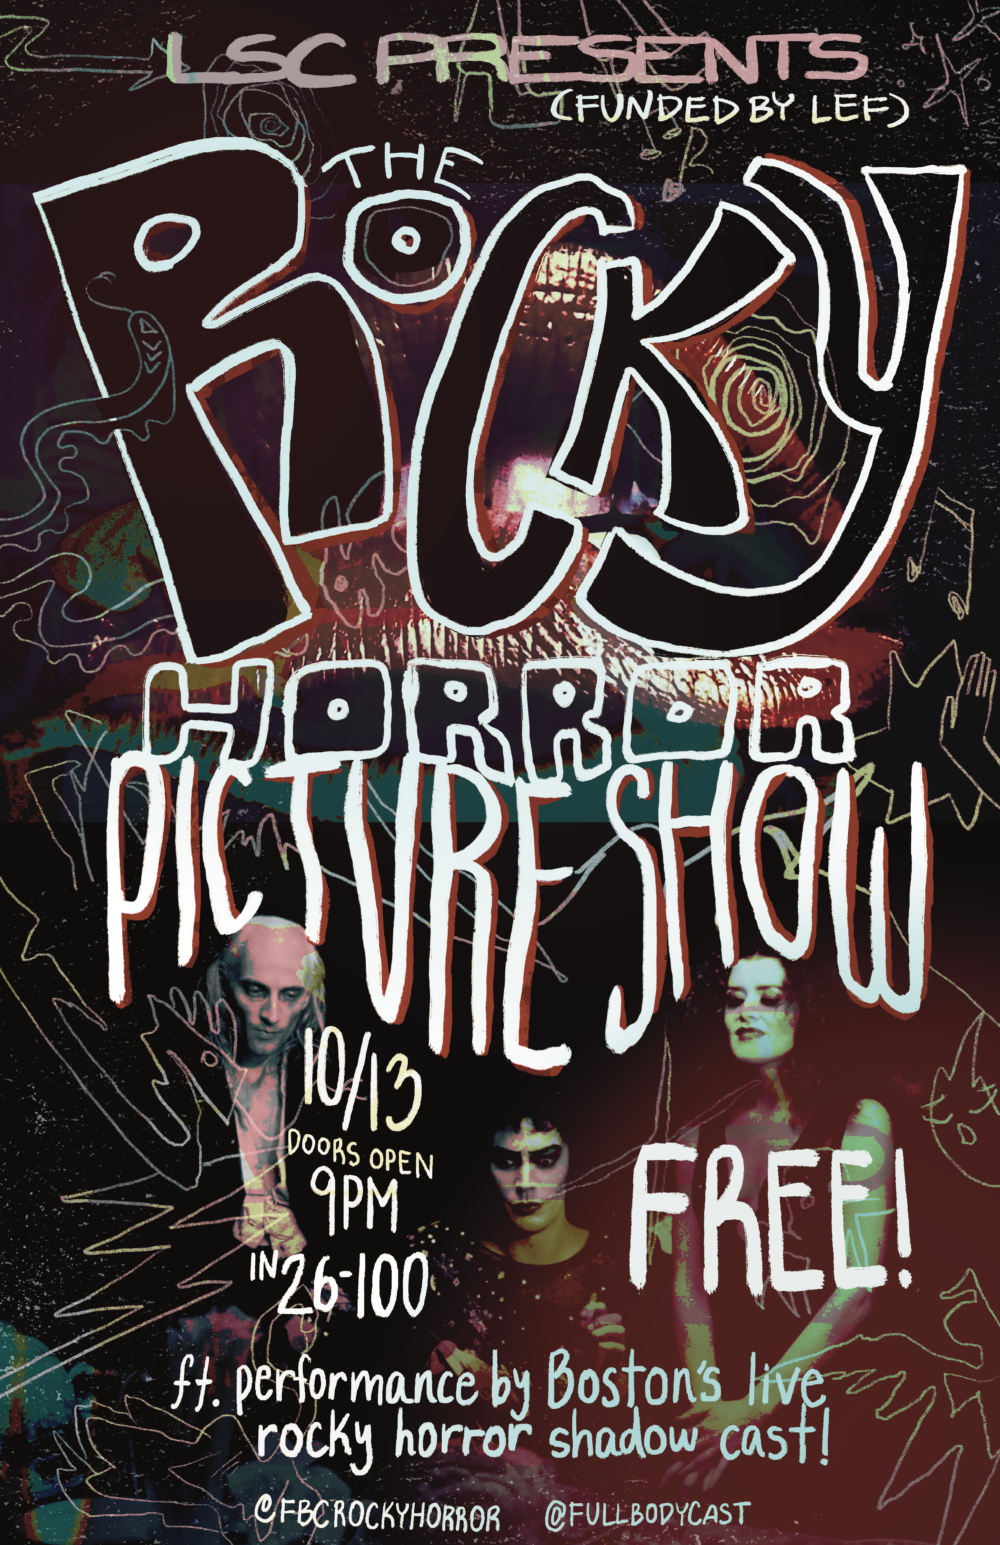 a poster for the movie "The Rocky Horror Picture Show", mostly hues of black and red with custom lettering for the movie title and movie stills in the background